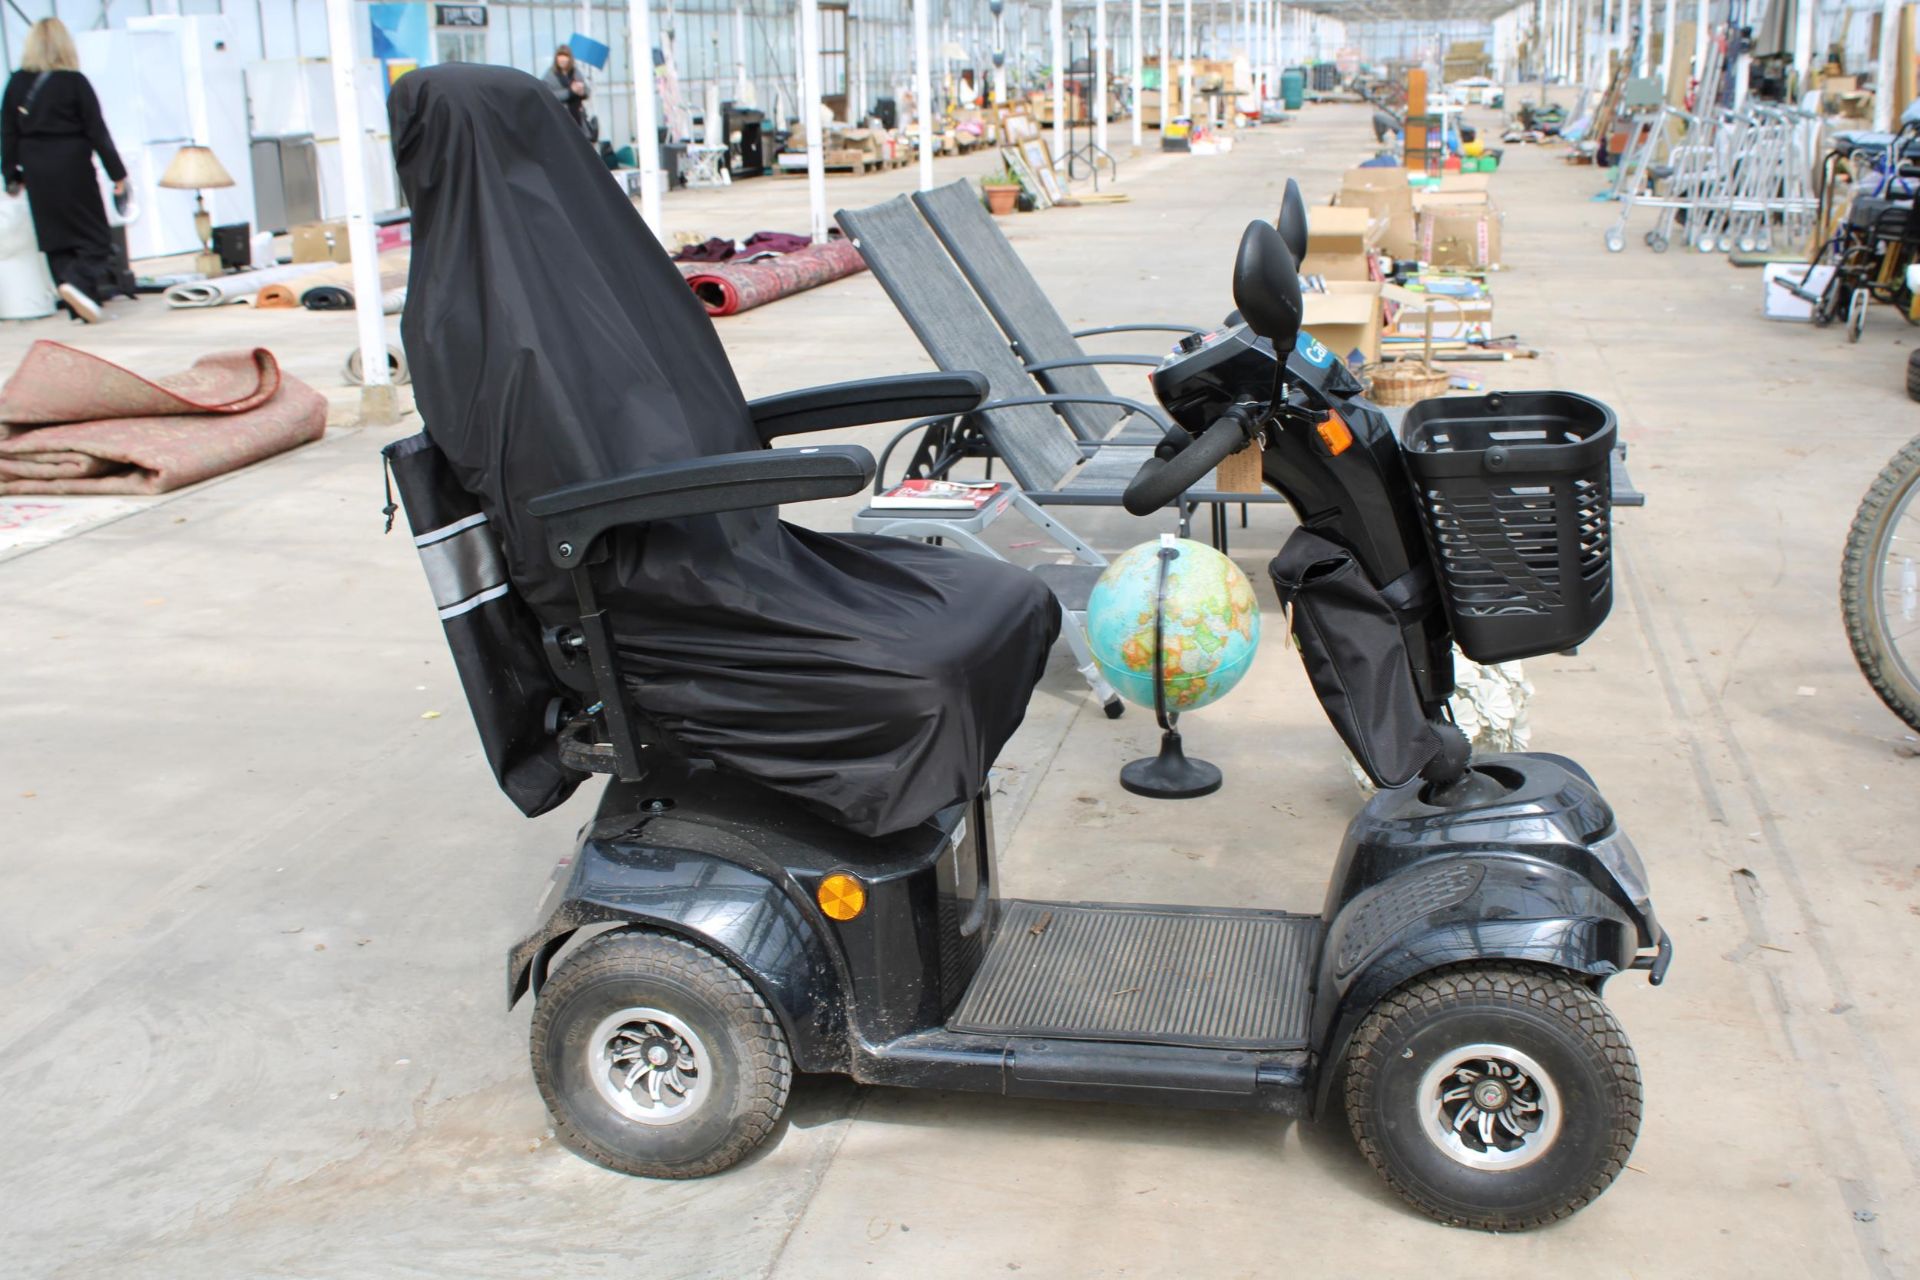 A FOUR WHEEL CARE CO ELECTRIC MOBILITY SCOOTER COMPLETE WITH CHARGER